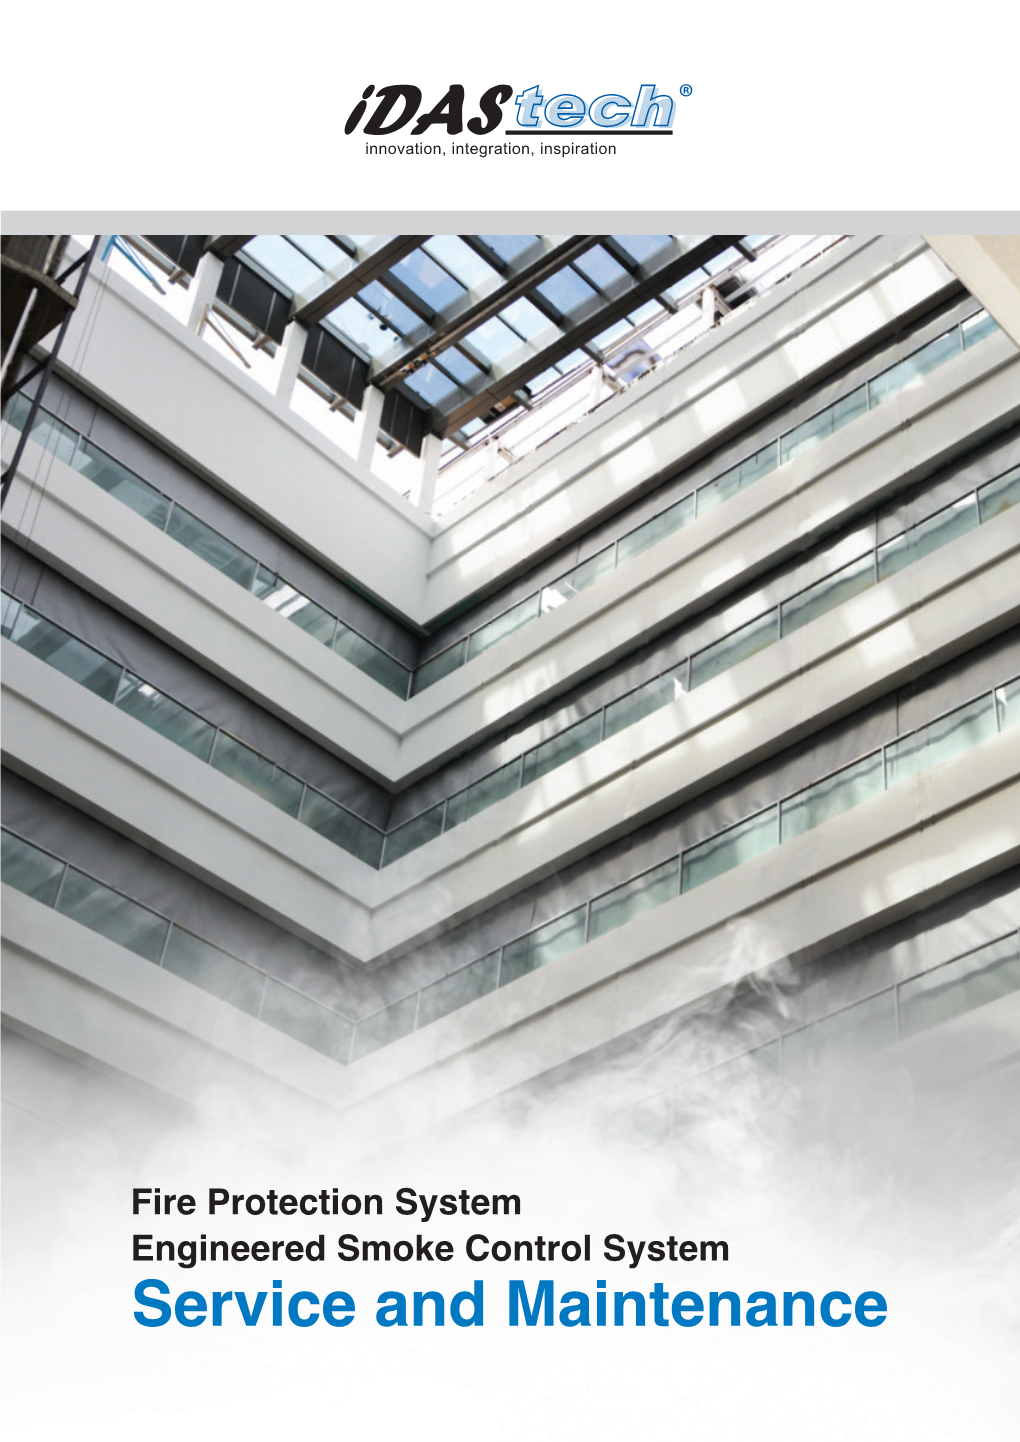 Engineered Smoke Control System Fire Protection System